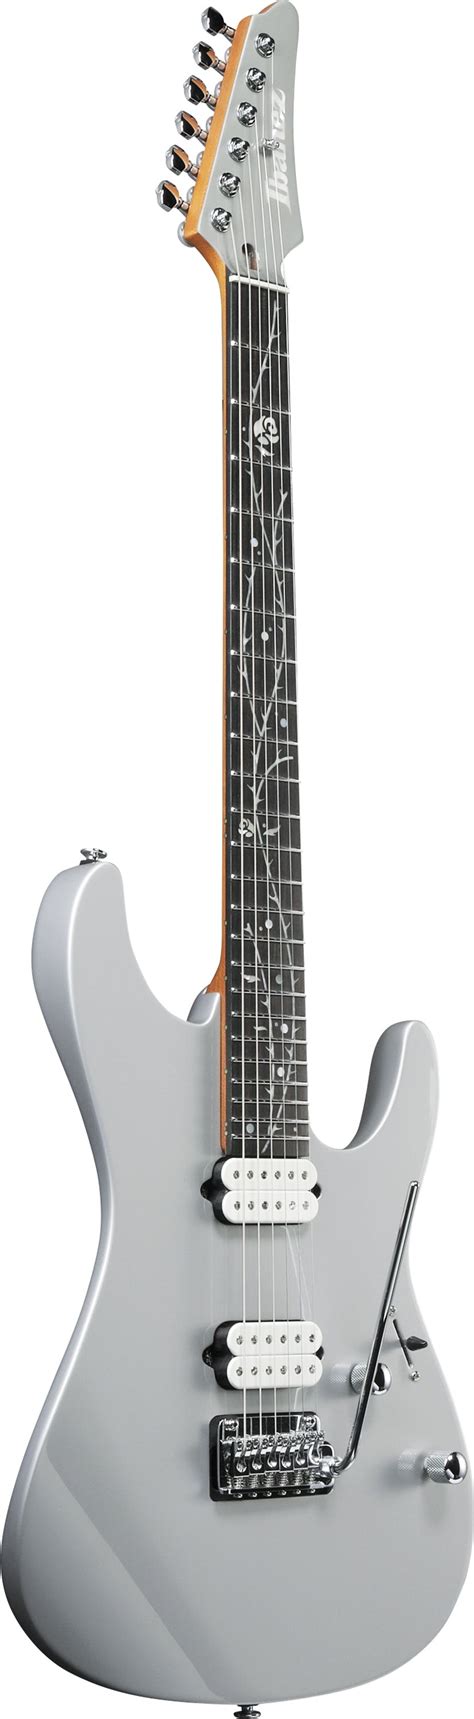 Ibanez Tod10 Tim Henson Signature Electric Guitar In Silver Andertons